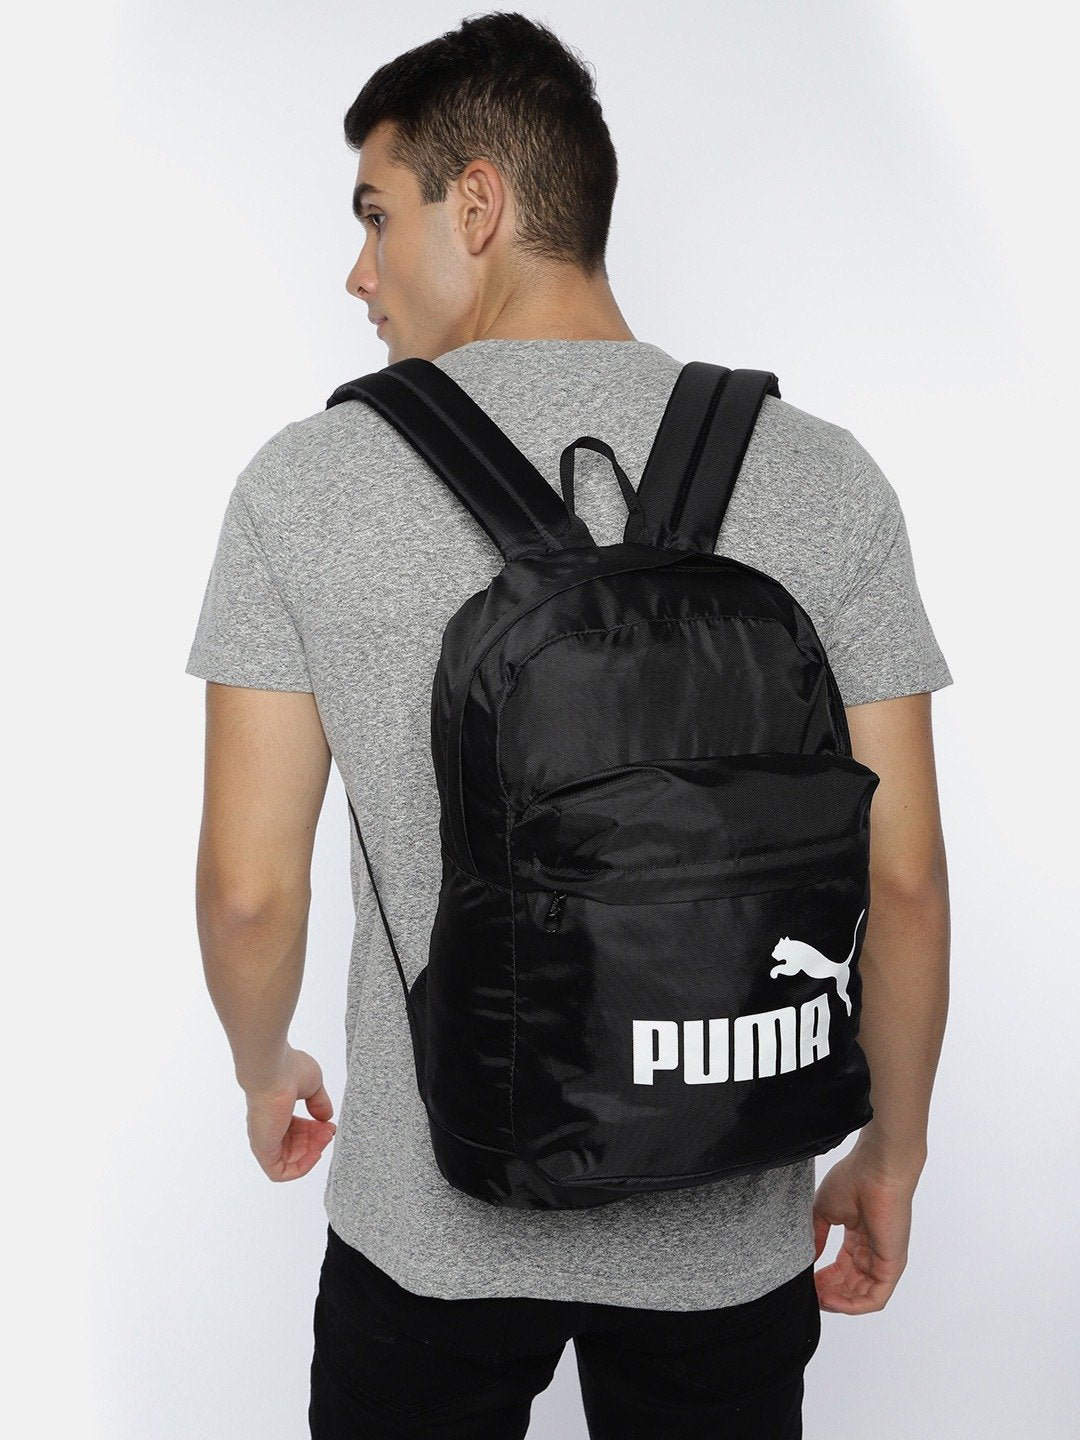 Unisex Black Solid Backpack - Discount Store